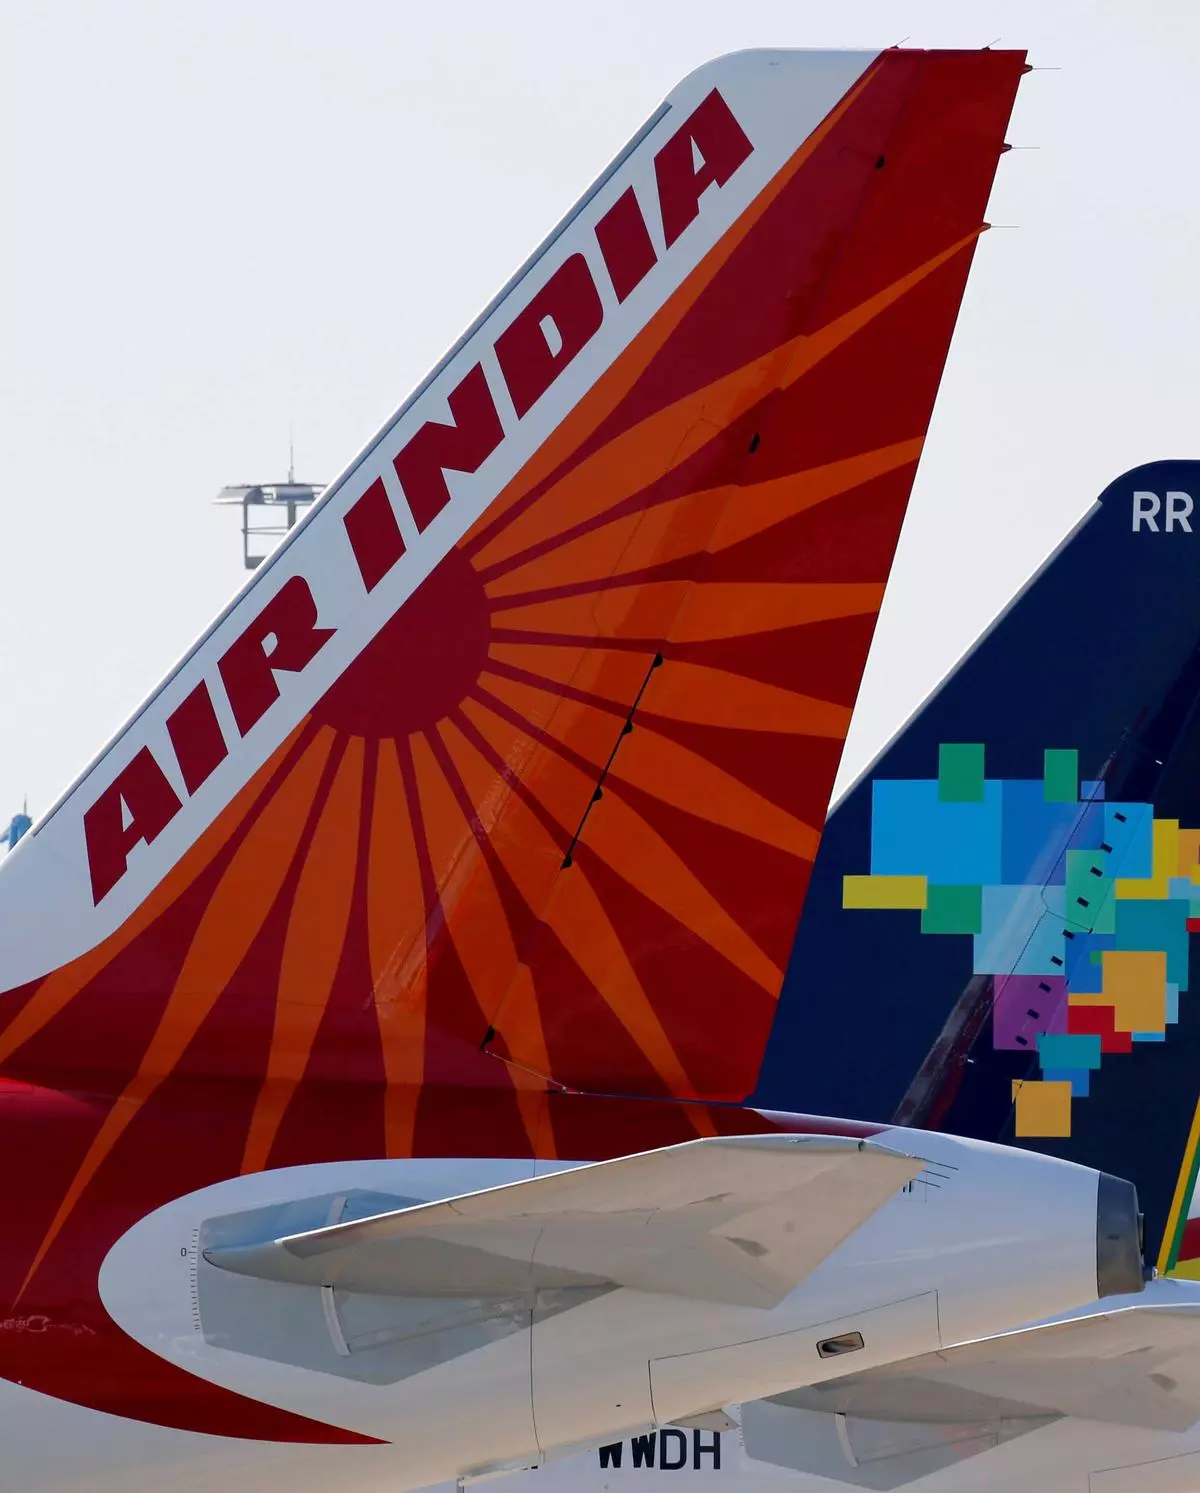 Air India partners with Thales for in-flight entertainment